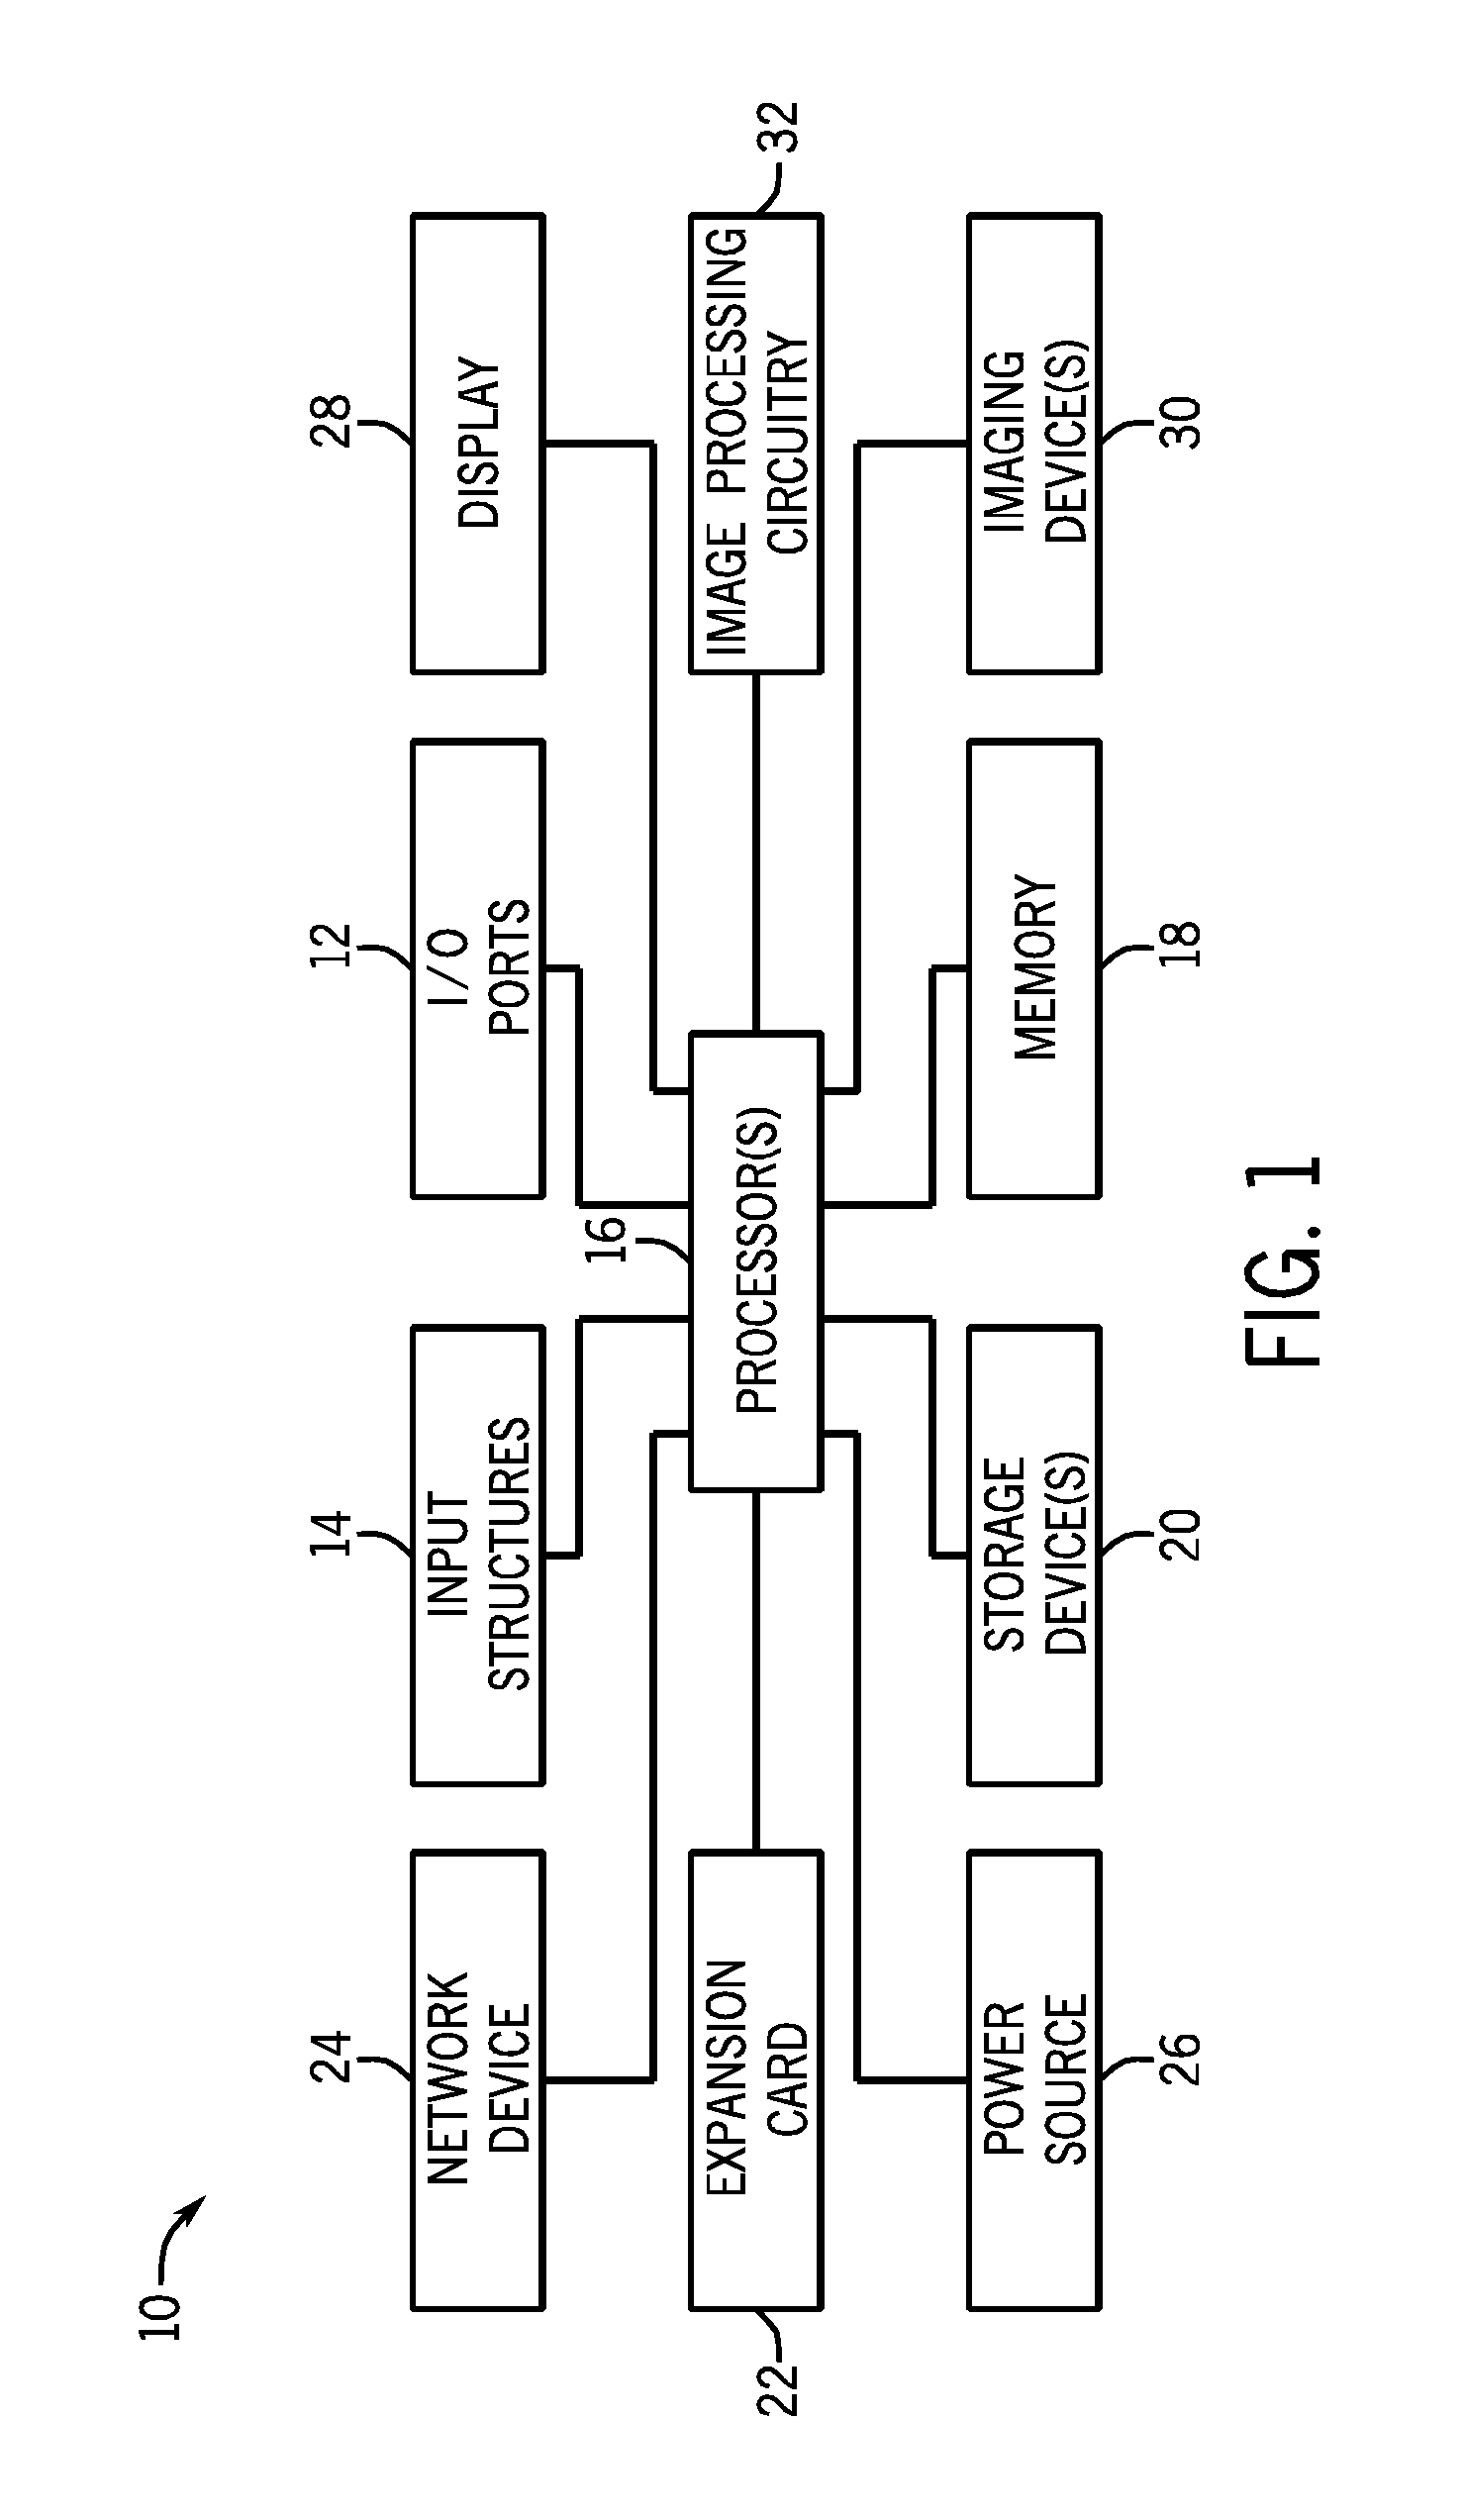 Image signal processor front-end image data processing system and method